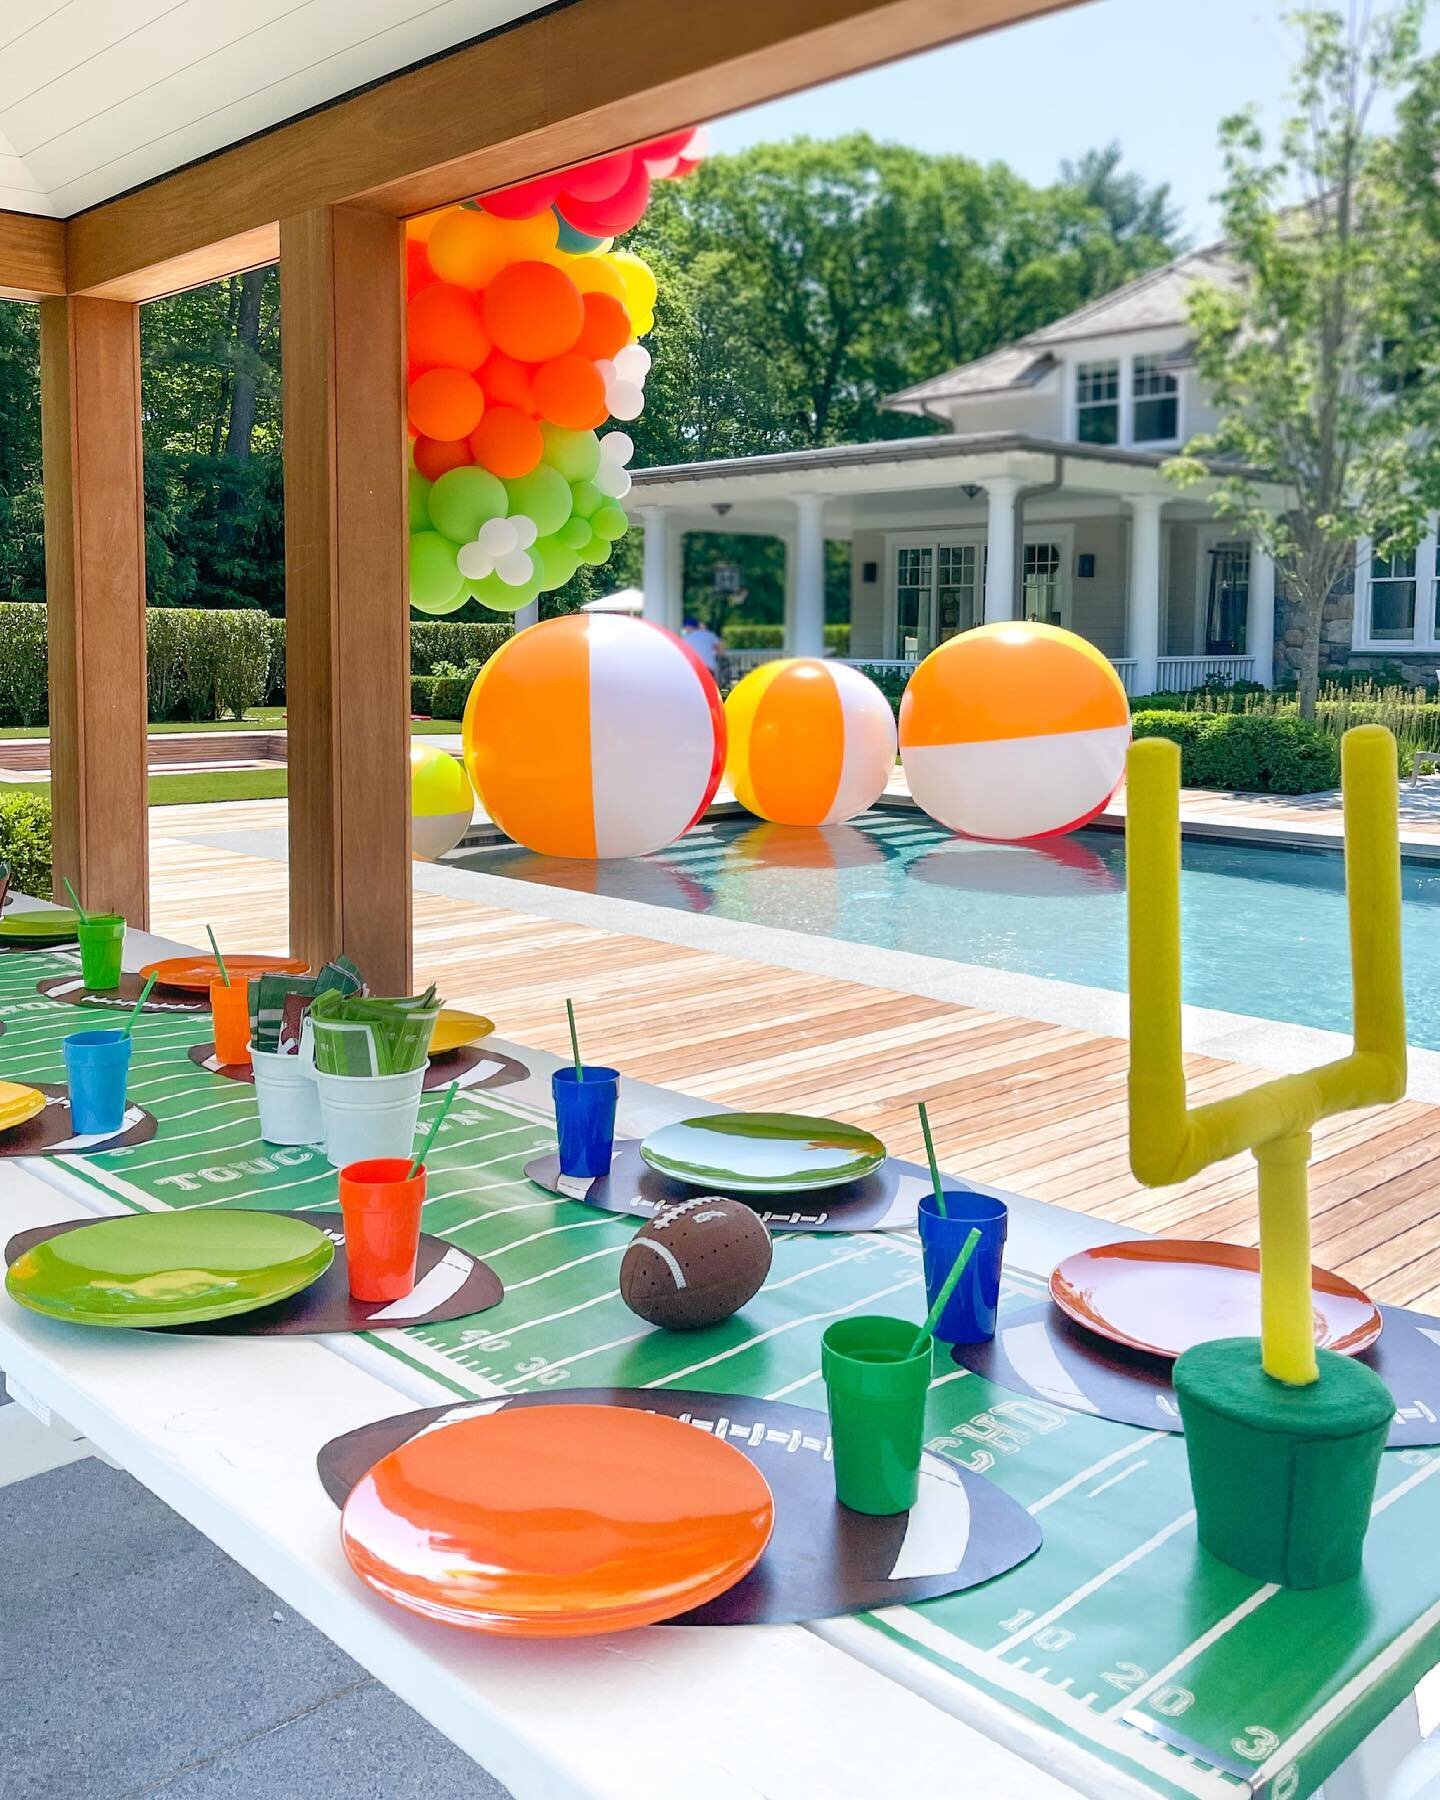 The summer is officially here and we kicked it off styling this amazing football-pool themed party! We set up the tablescape using cool football-themed decor and the surroundings with fun giant beach balls to set the tone. 
Let the fun come to you!
W